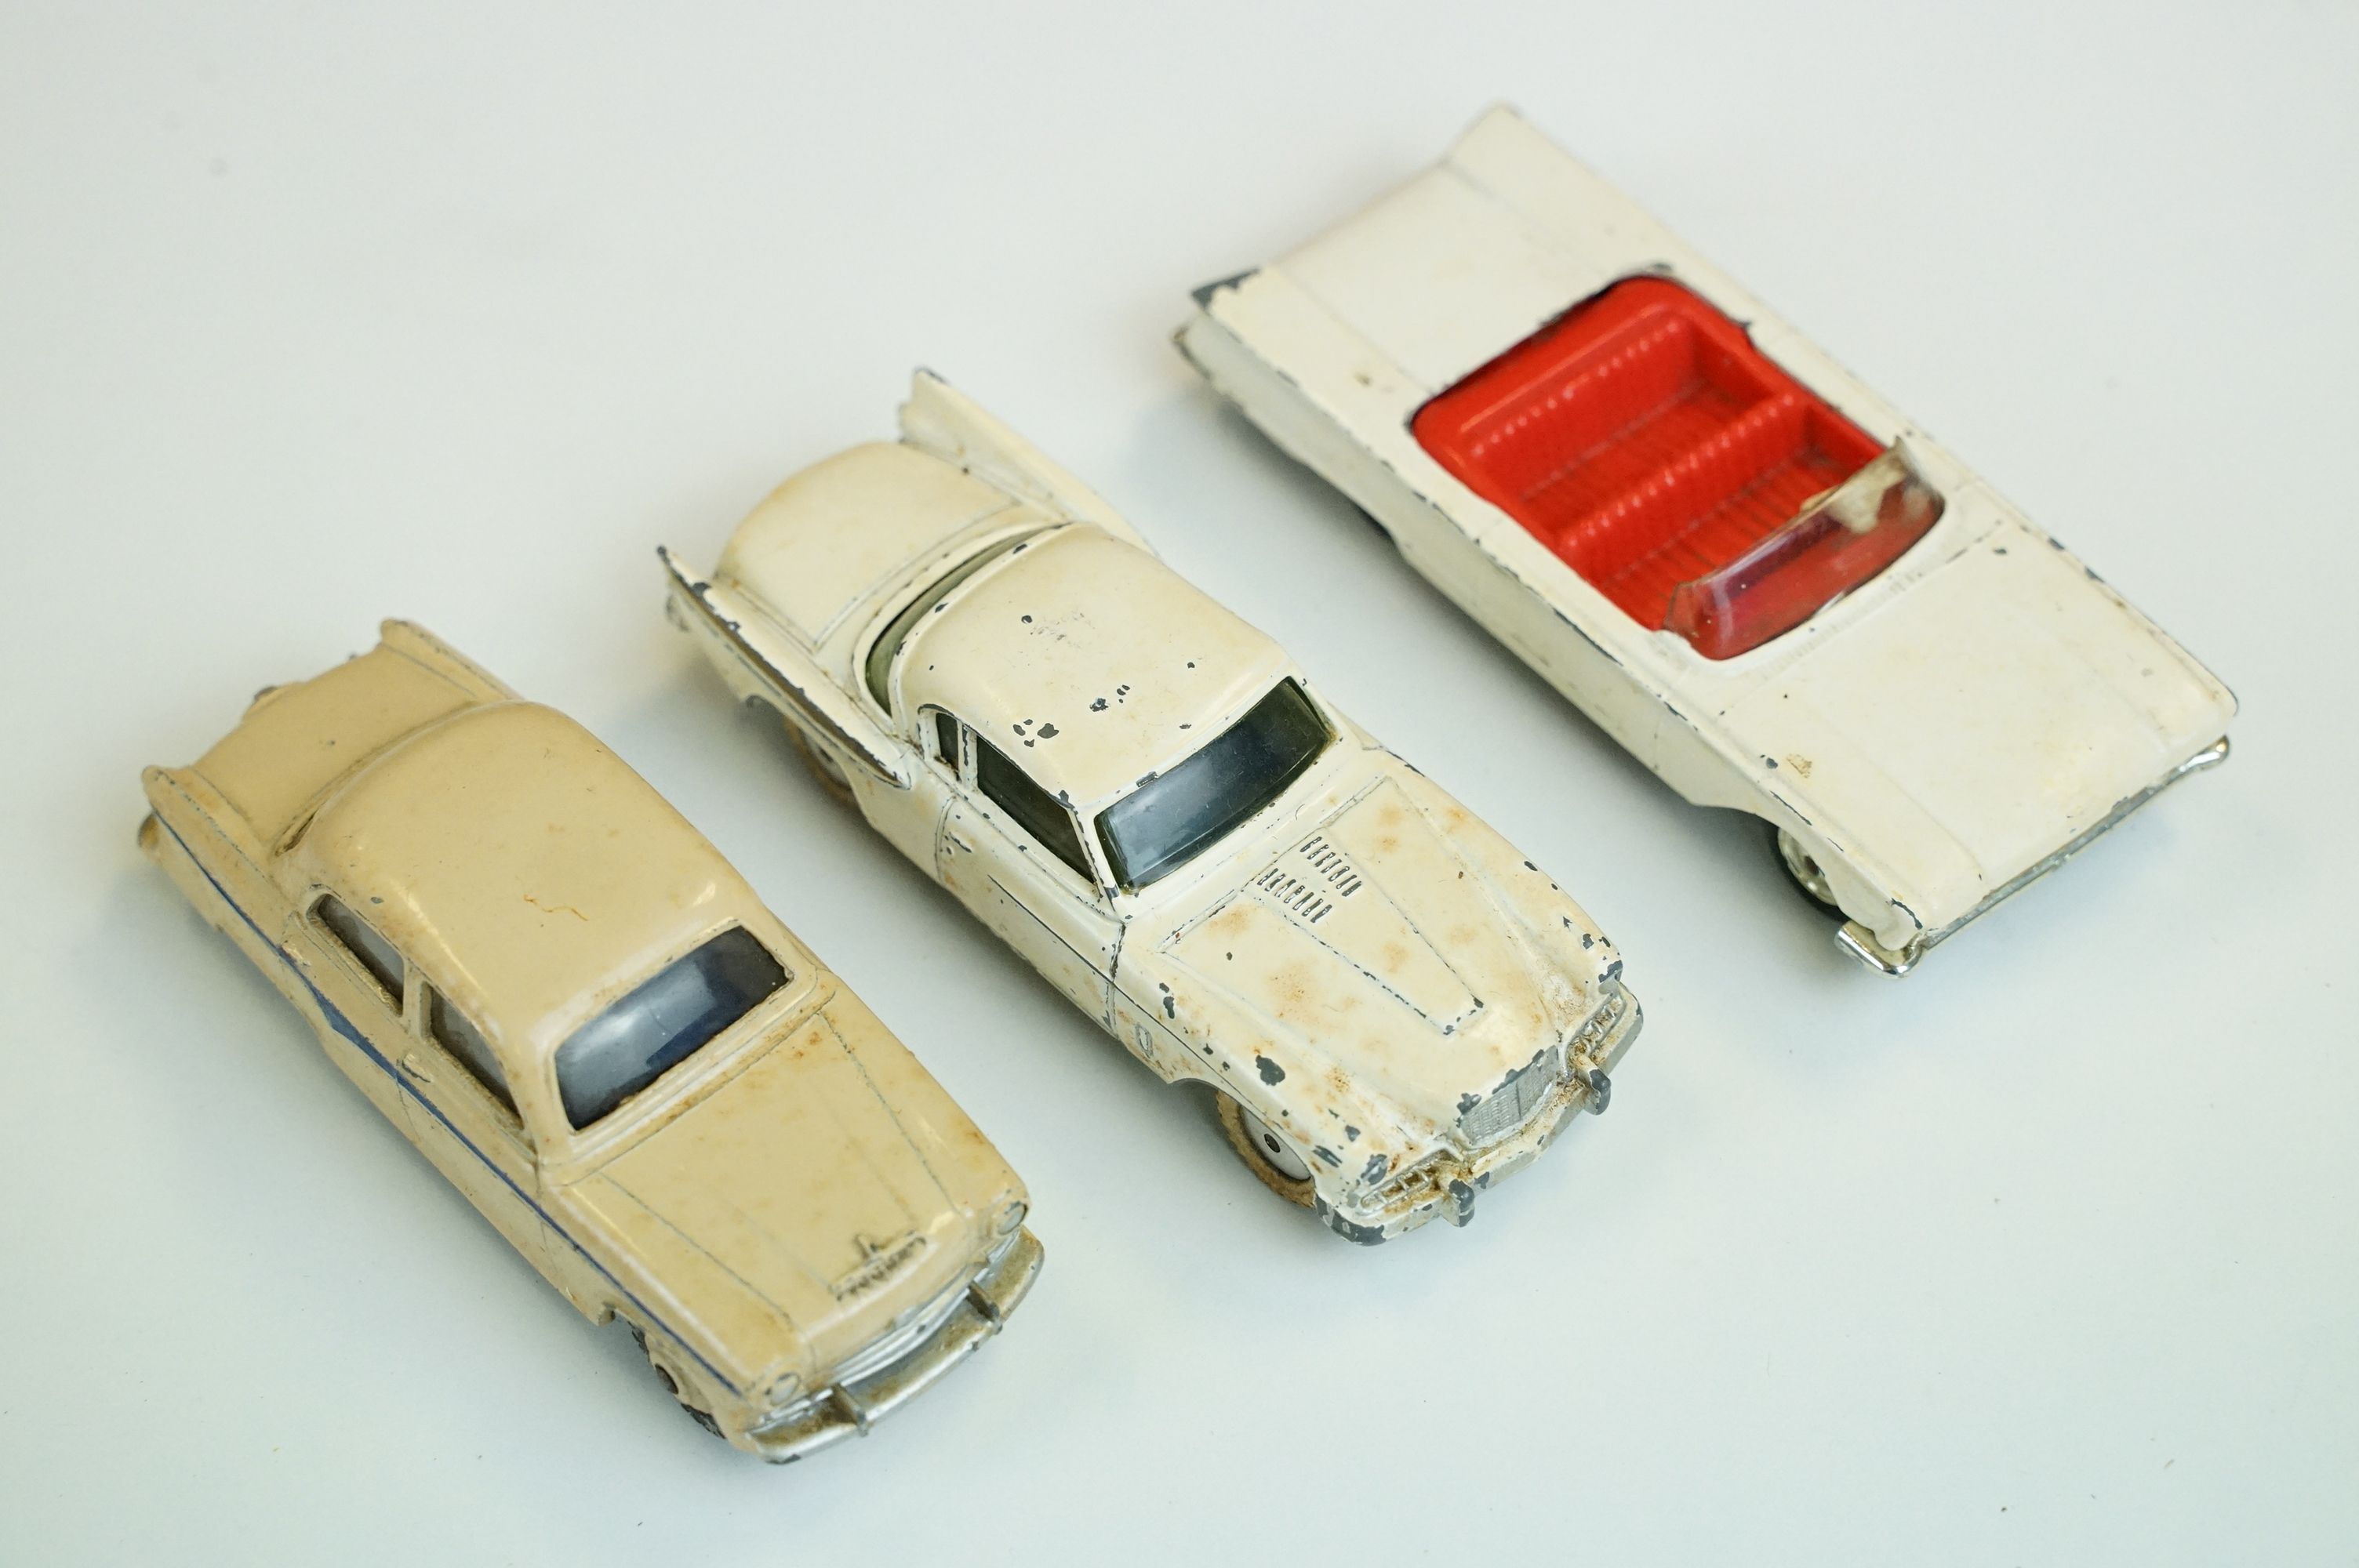 35 Mid 20th C play worn diecast models to include Dinky, Triang & Corgi examples, featuring Triang - Image 3 of 13